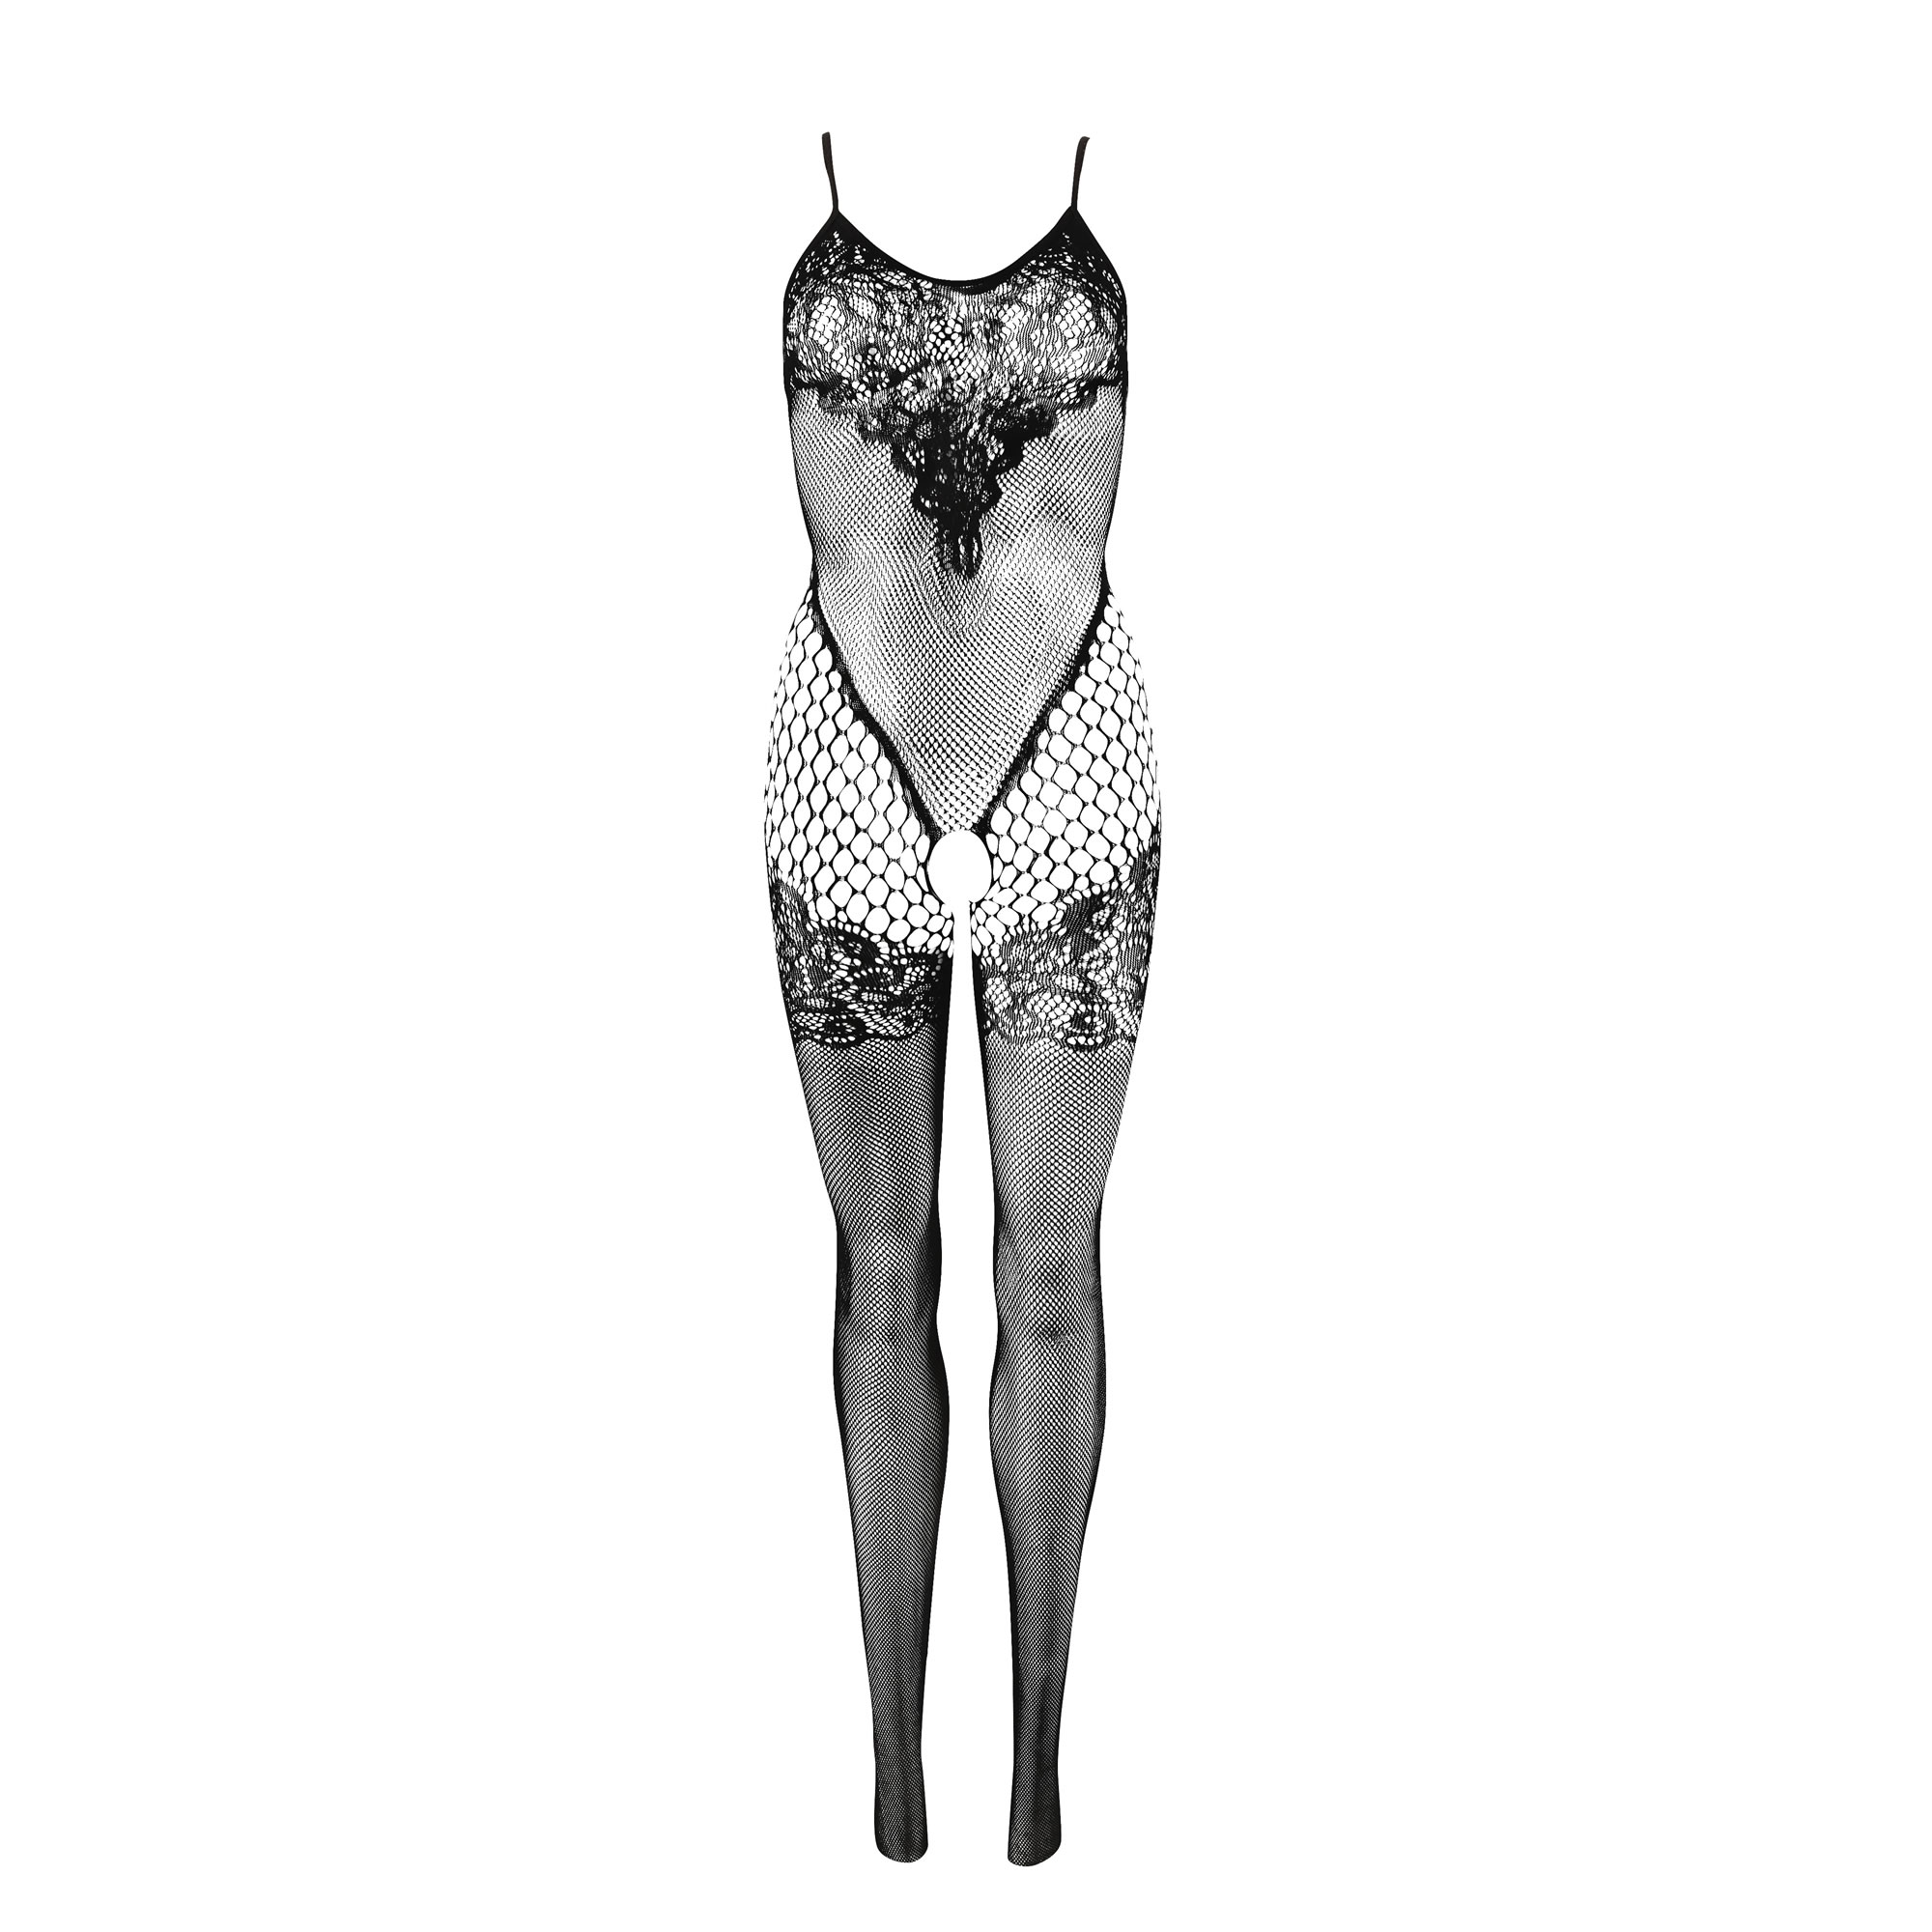 Lace Catsuit with Body and Stay-Up Look